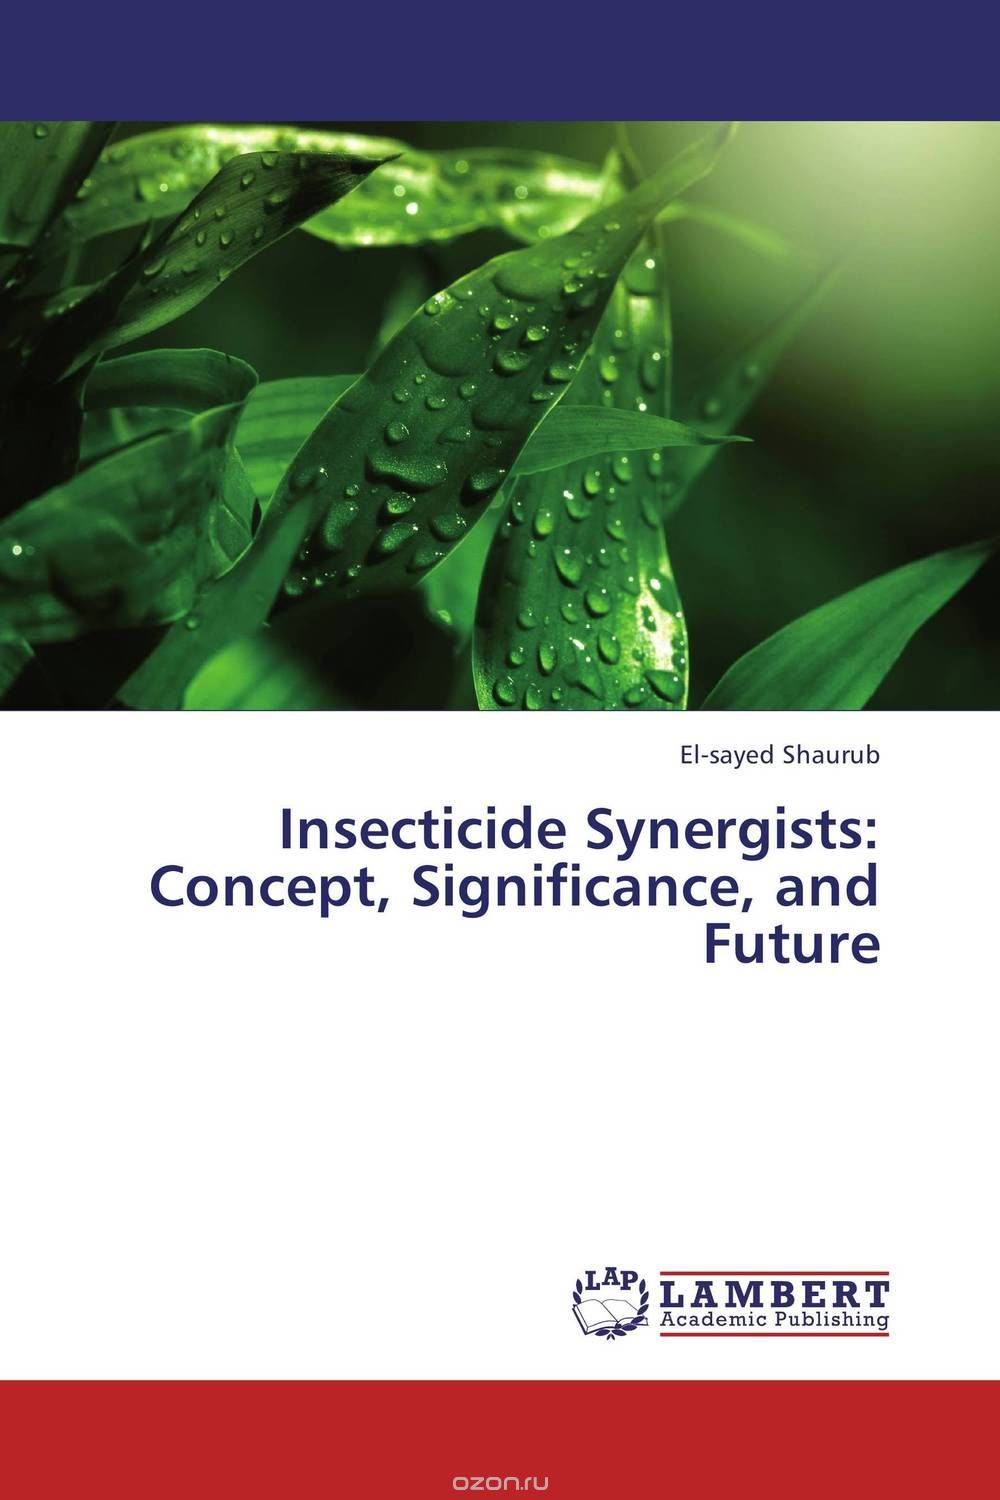 Скачать книгу "Insecticide Synergists: Concept, Significance, and Future"